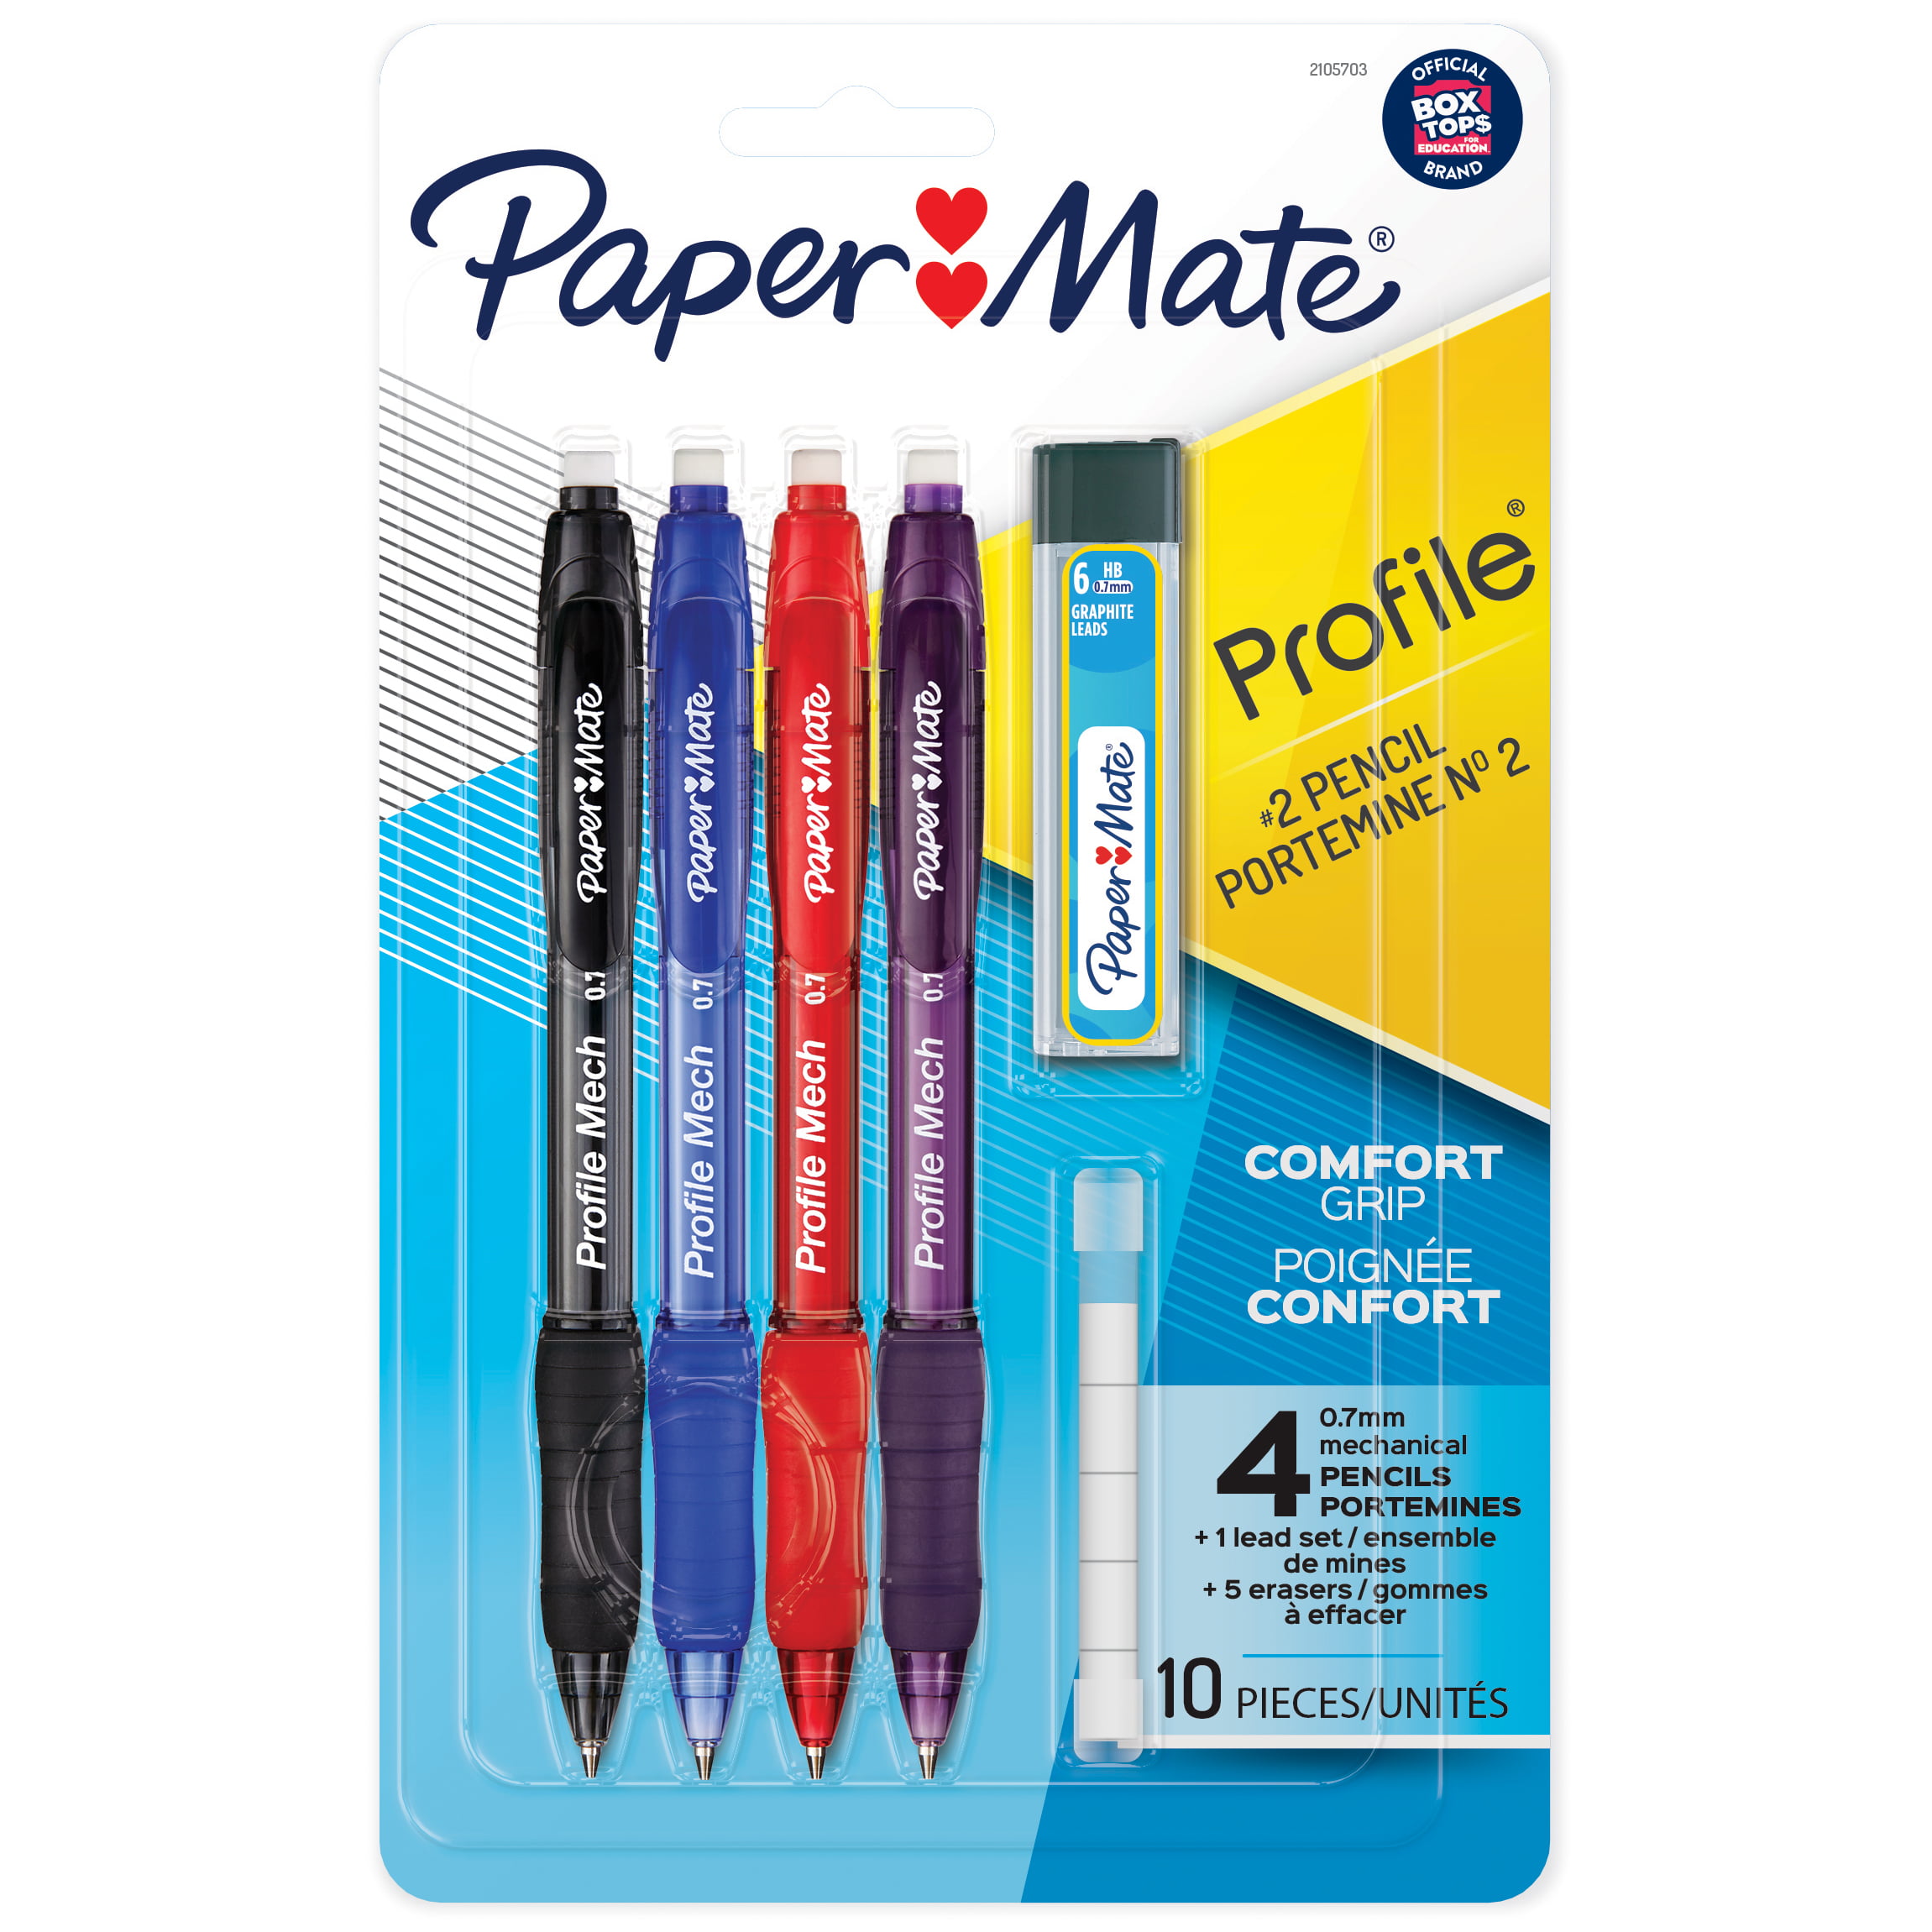 2 Hard Lead 2096310 for sale online Paper Mate Classic Mechanical Pencils No 